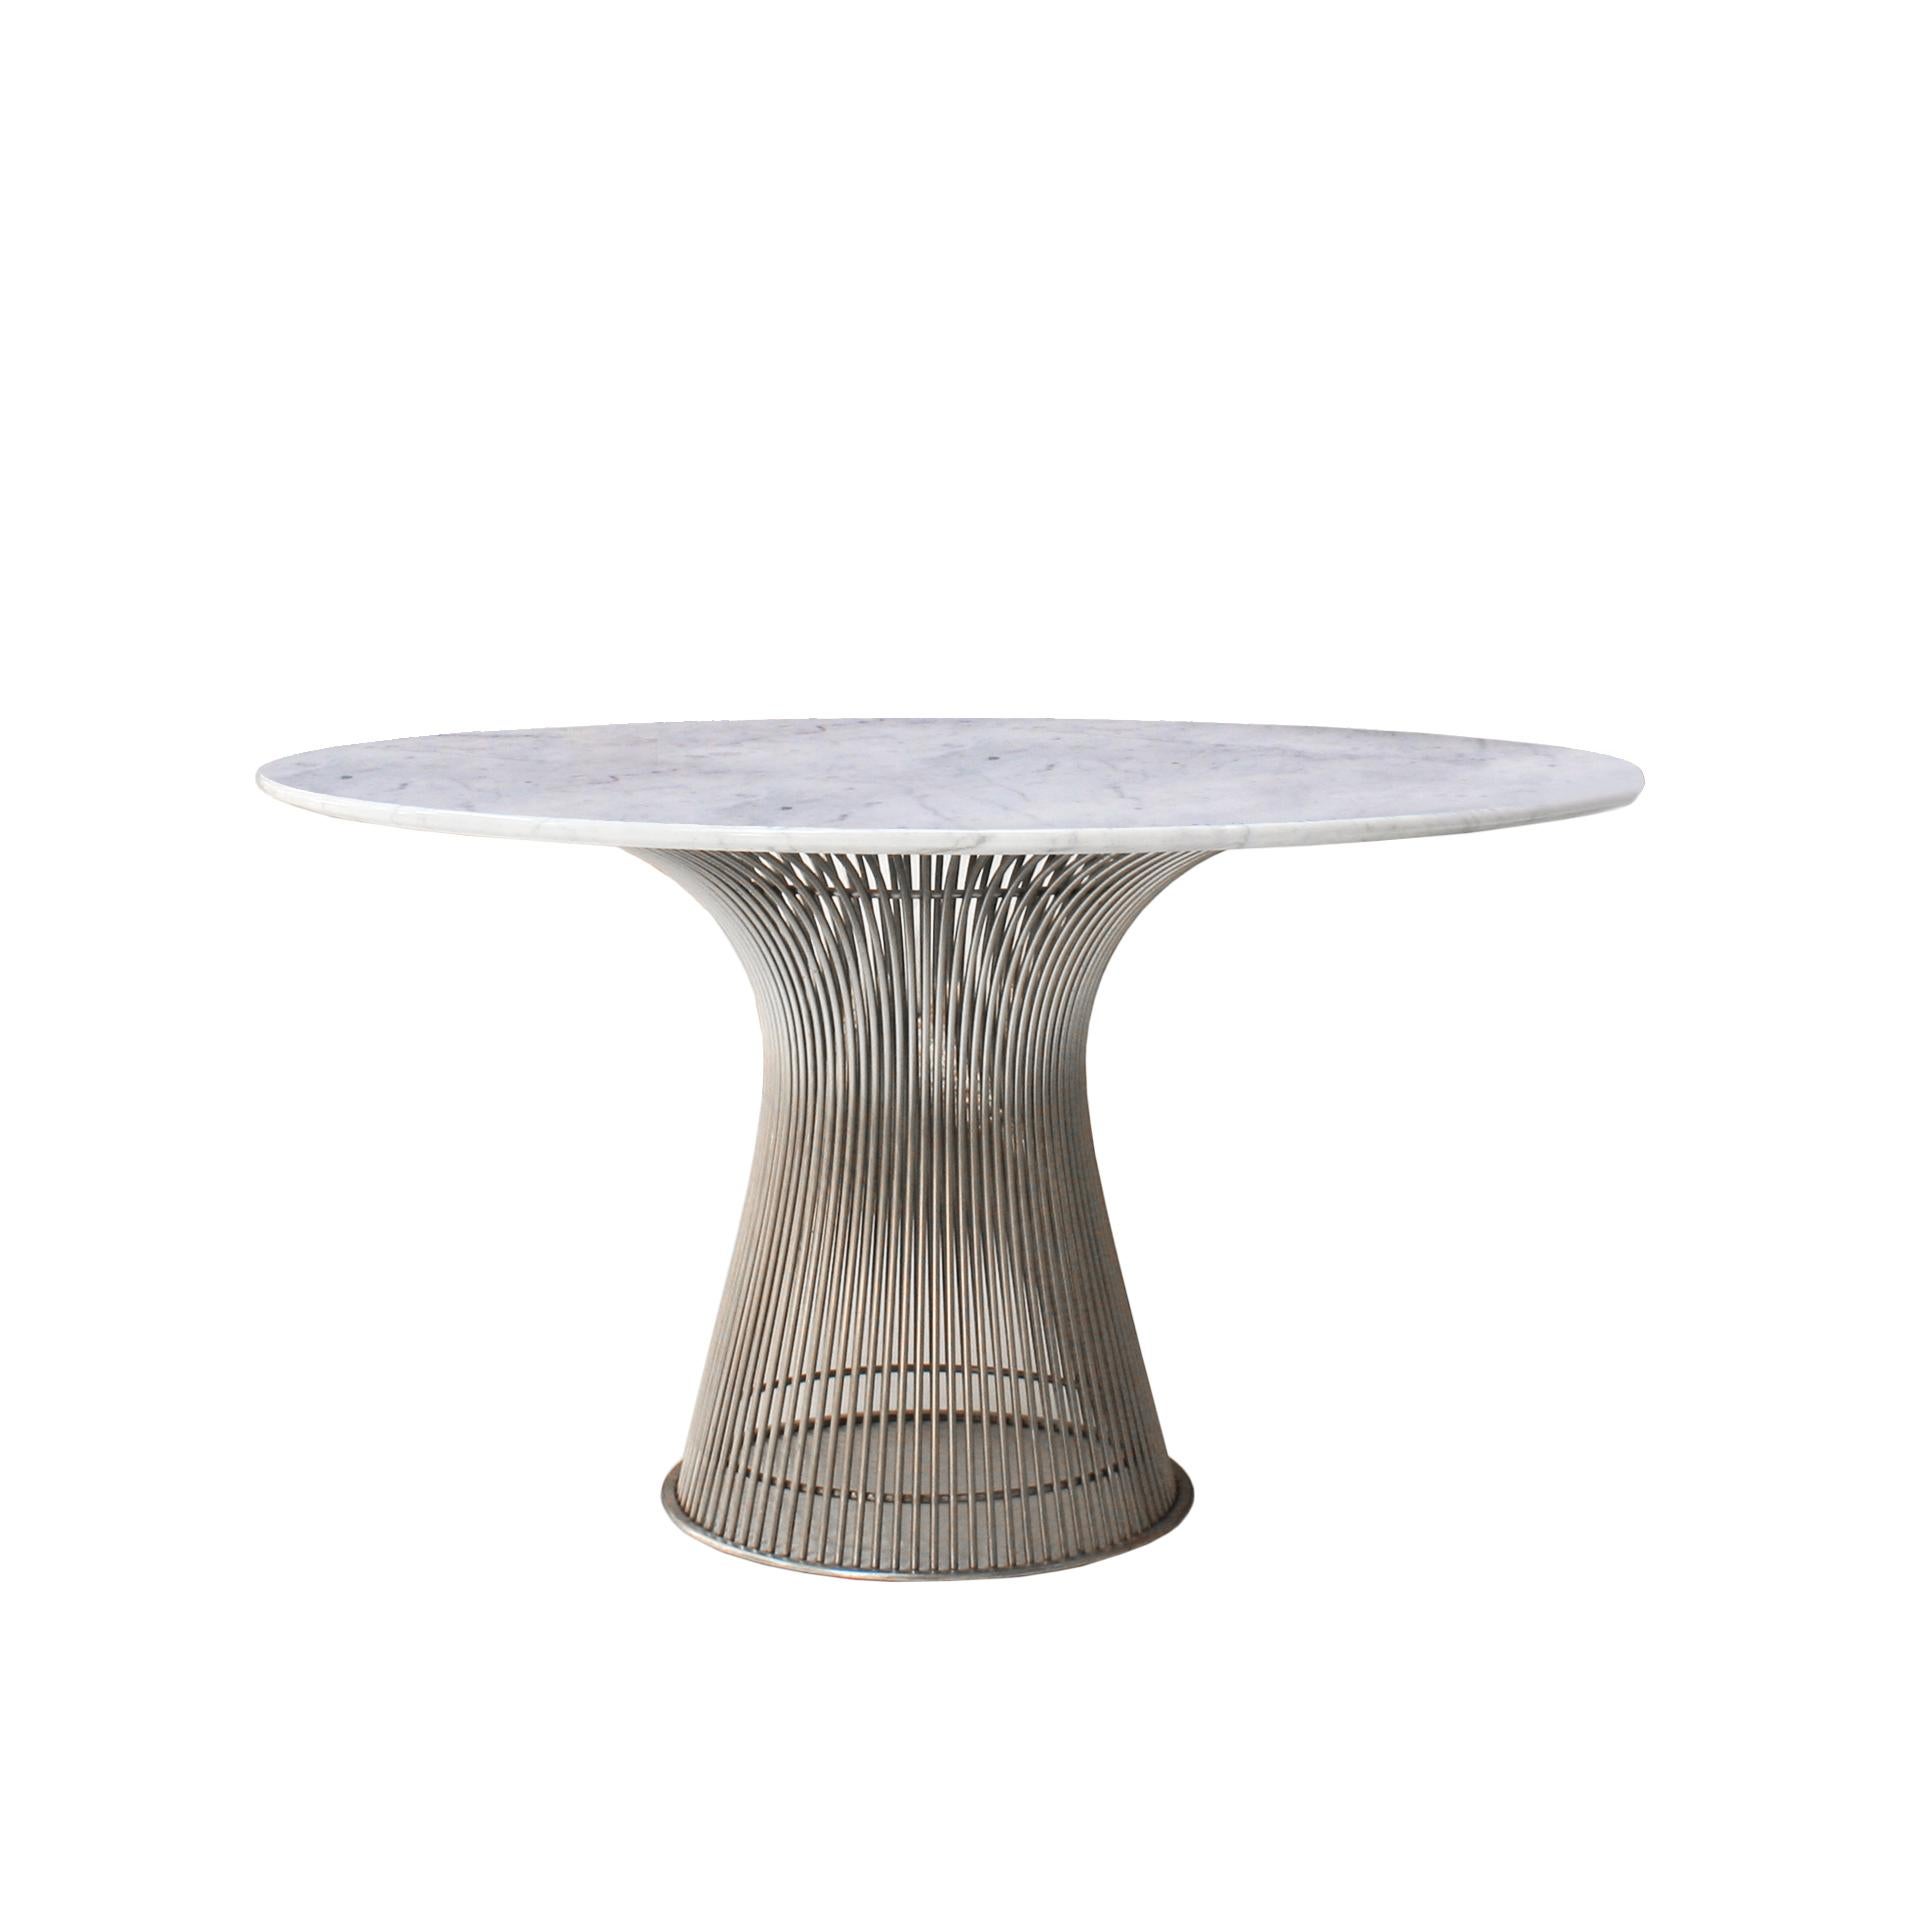 Dining table designed by Warren Platner edited by Knoll, composed of a steel structure with welded rods creating curved and circular shapes. Tabletop made of Carrara marble, USA, 1970s.





 